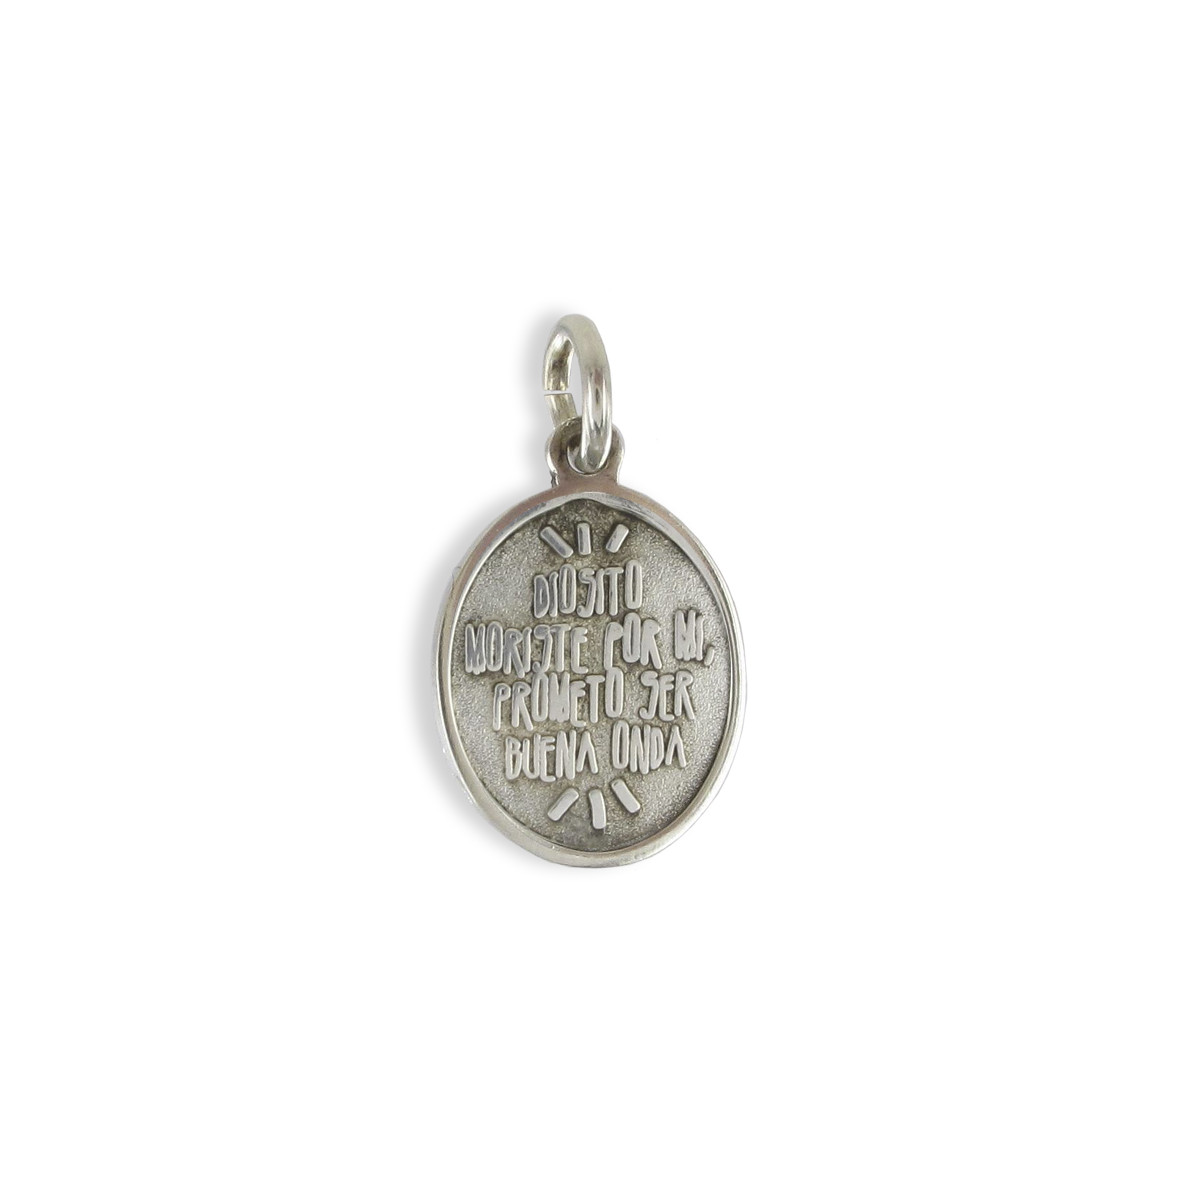 OVAL SILVER MEDAL 18 X 15 MM